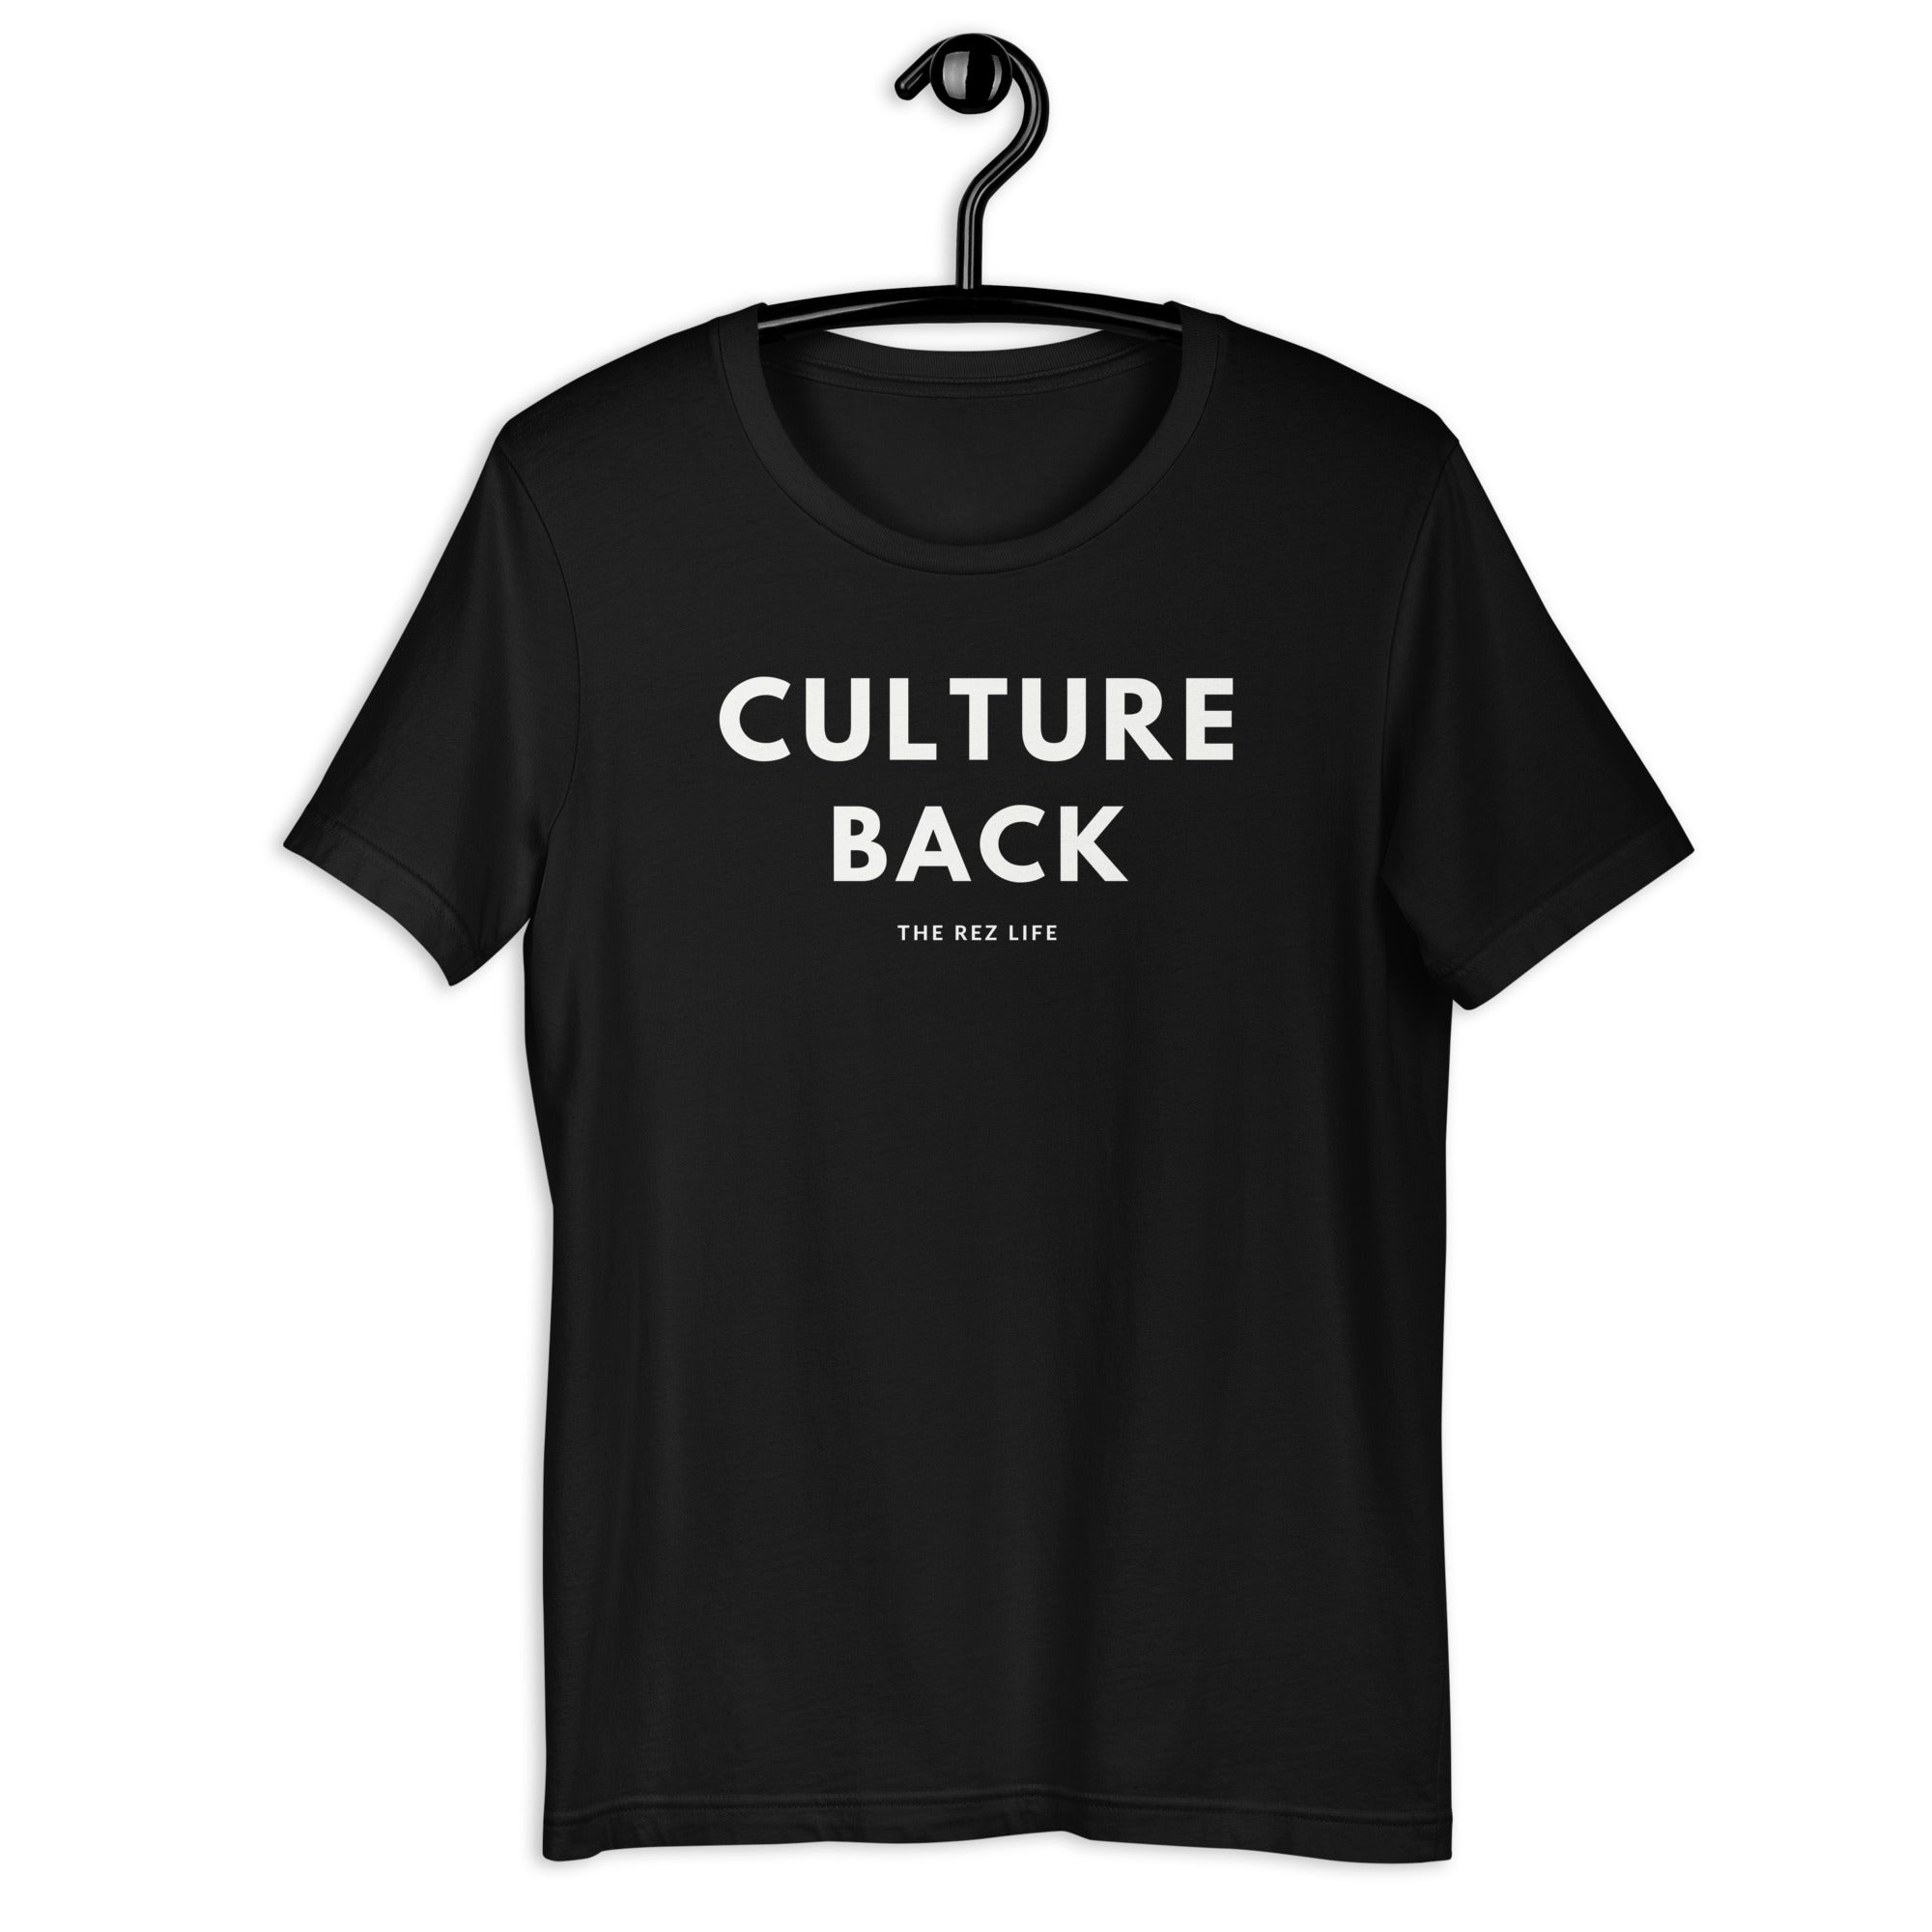 Comin for our CULTURE BACK! Tee